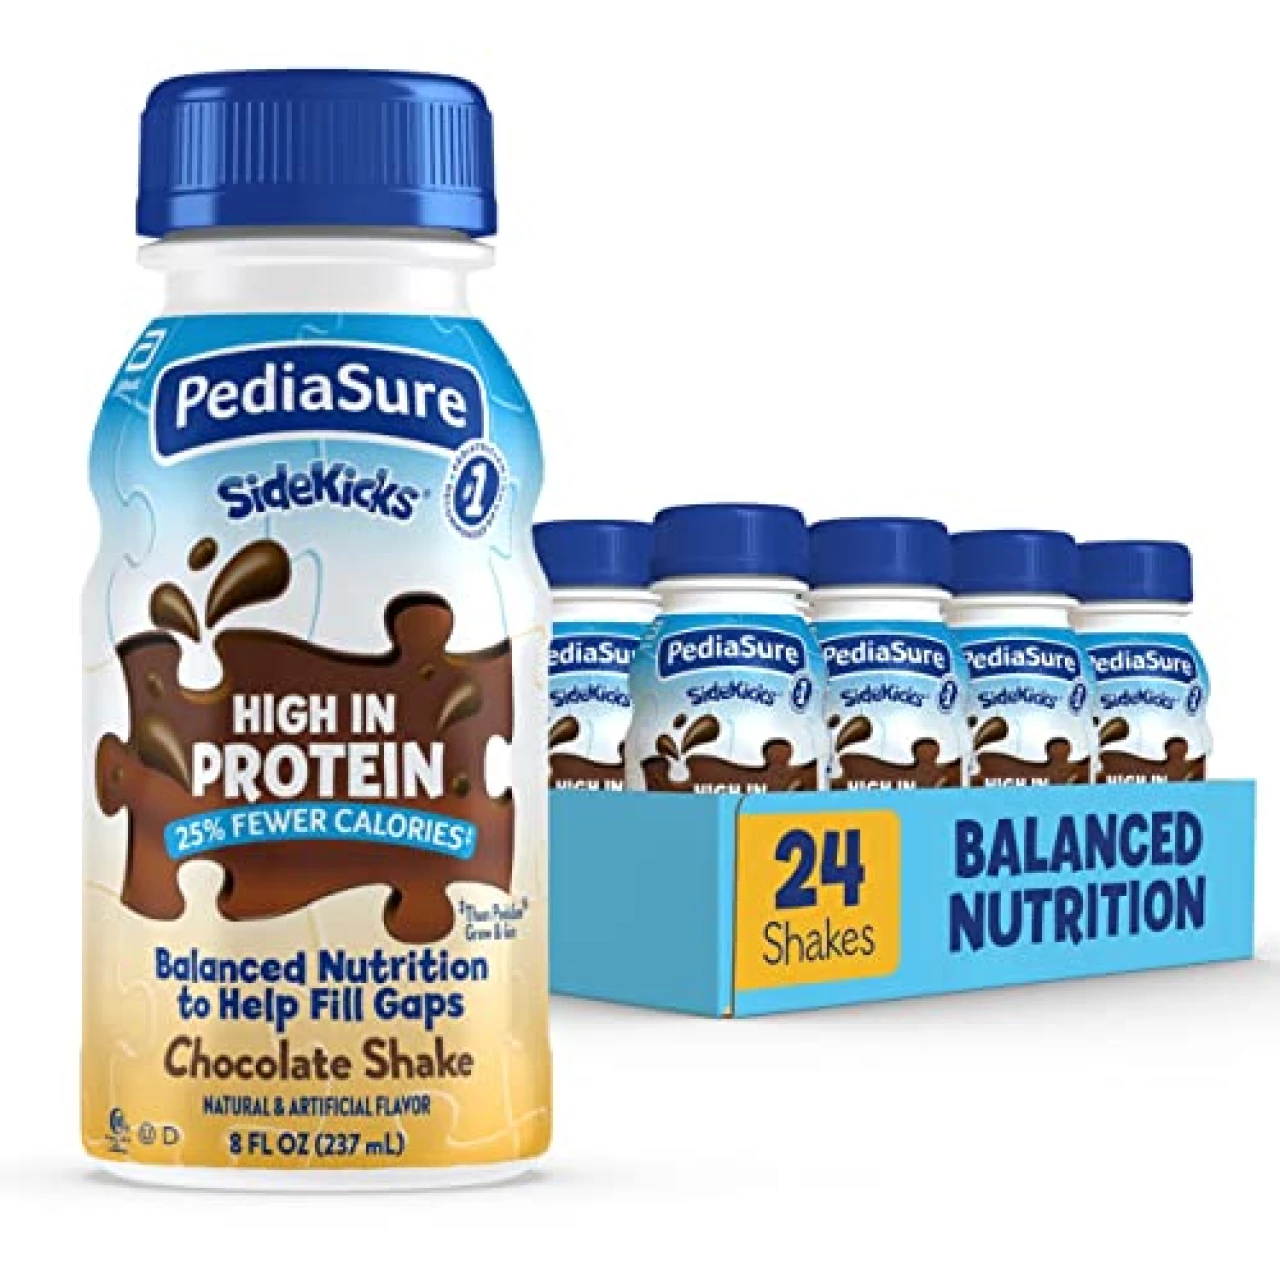 PediaSure SideKicks, 24 Shakes, Kids Protein Shake, With Key Nutrients and Protein to Help Kids Catch Up on Growth and Help Fill Nutrient Gaps, Chocolate, 8 fl oz, Pack of 24